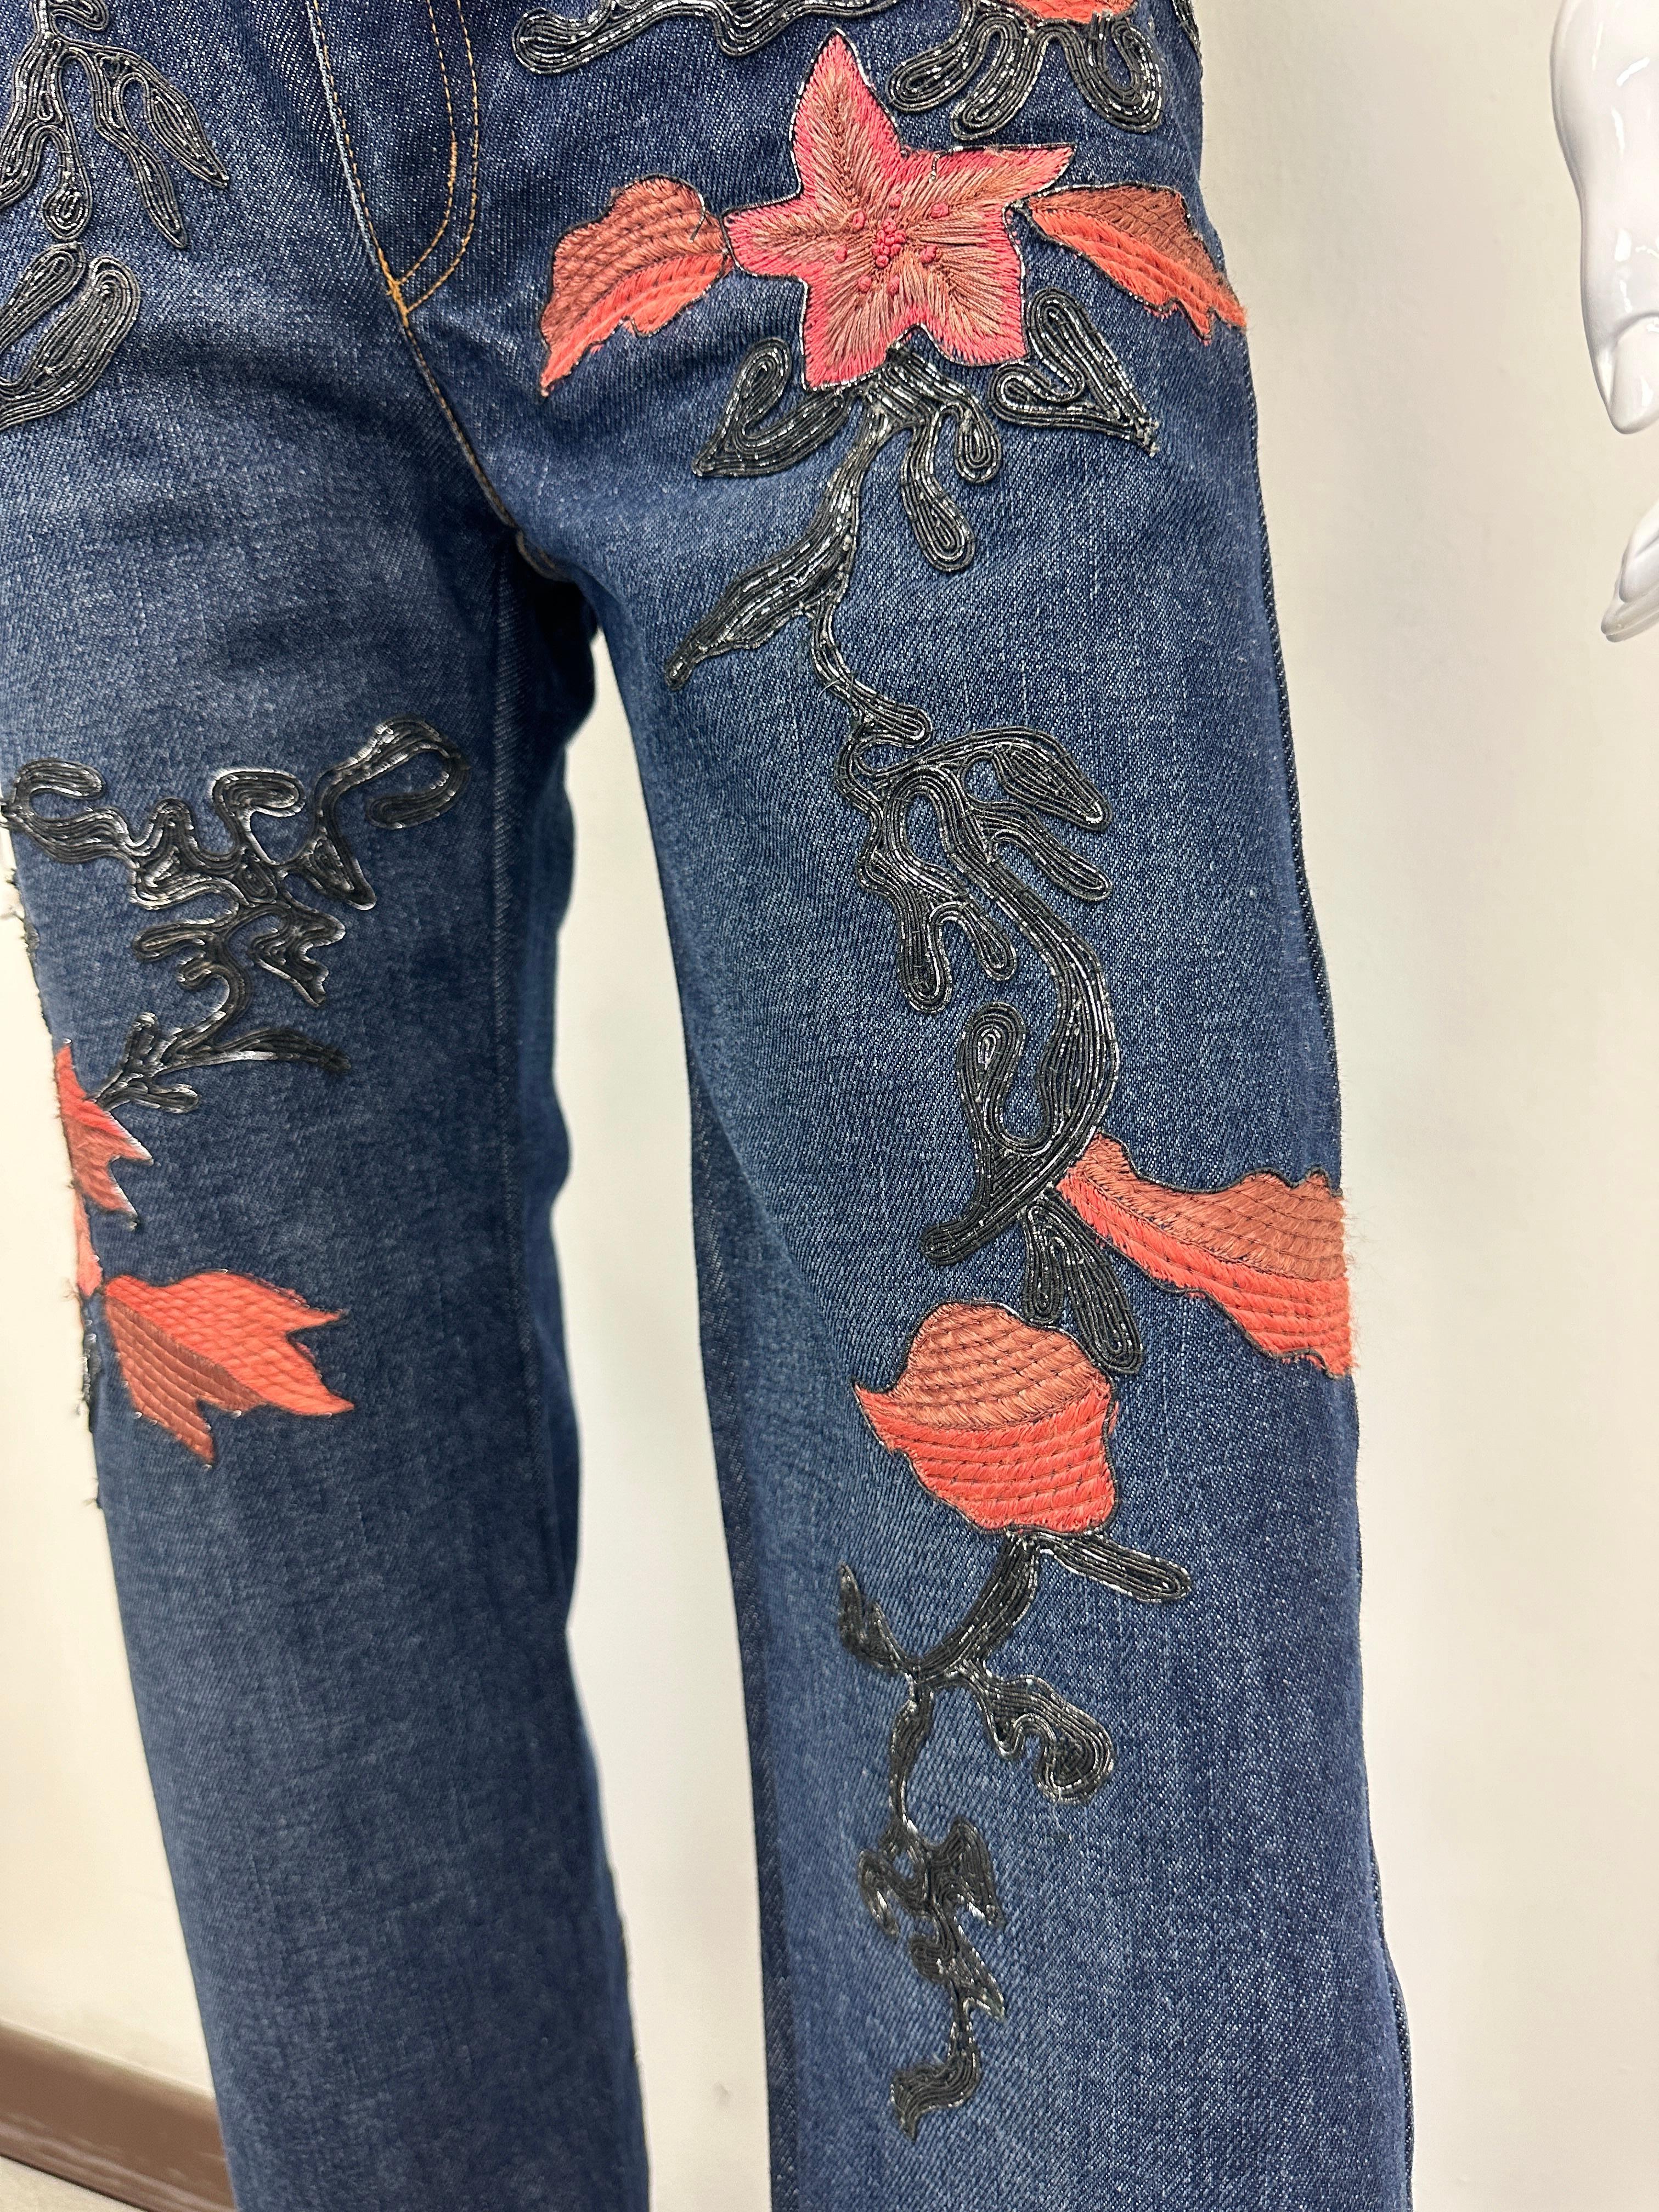 F/W 1999 Gucci by Tom Ford floral embroidered jeans For Sale 4